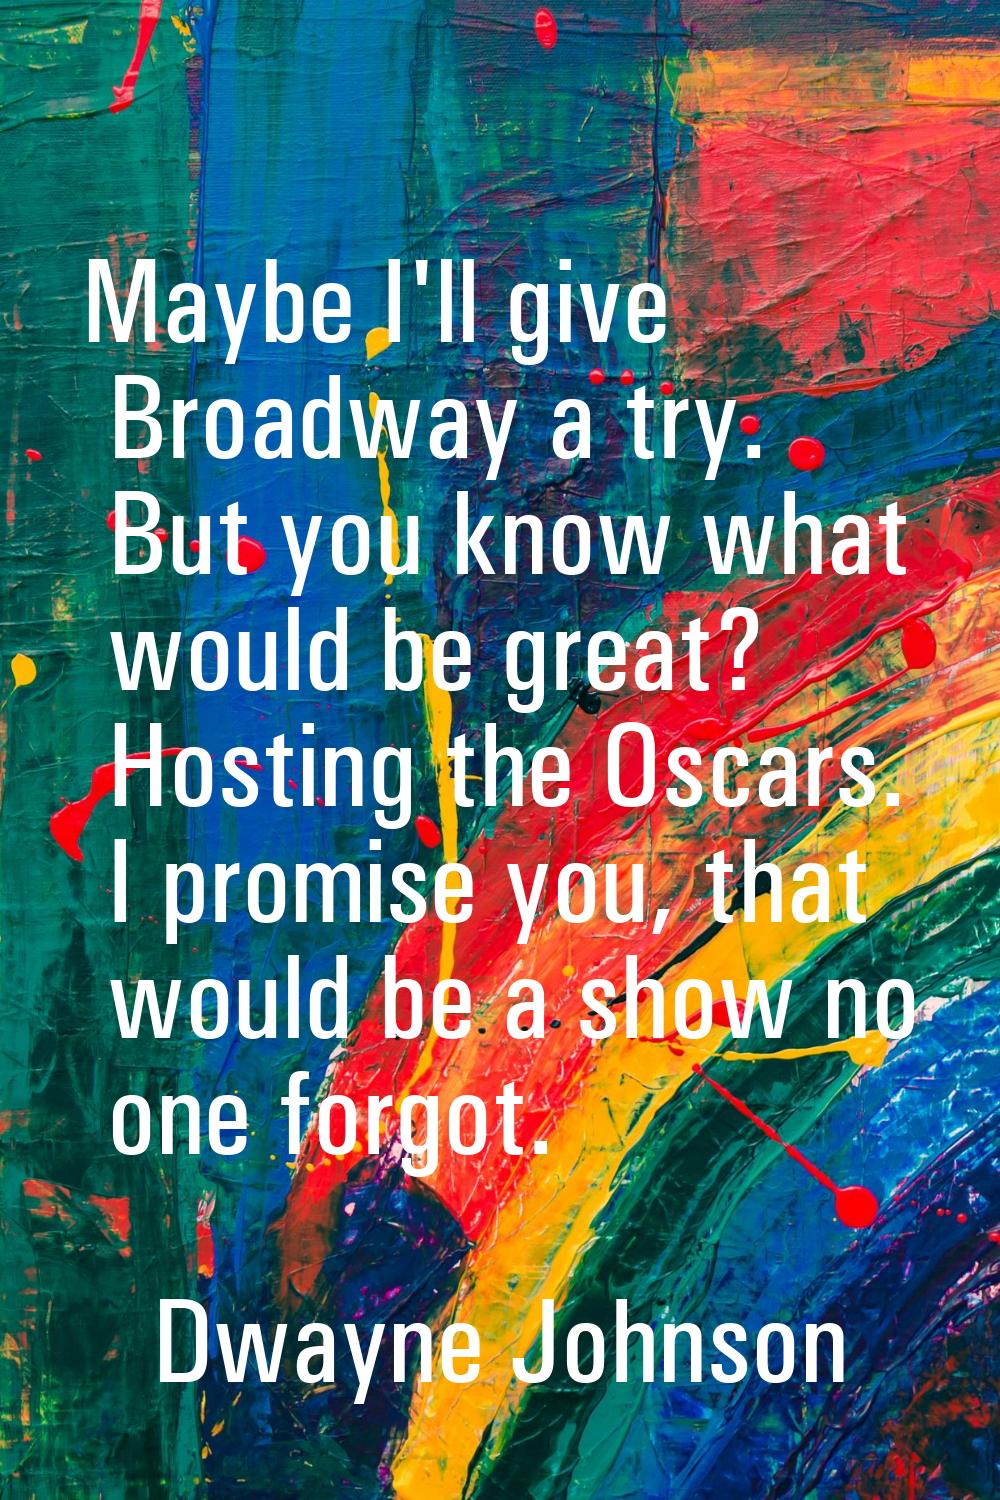 Maybe I'll give Broadway a try. But you know what would be great? Hosting the Oscars. I promise you